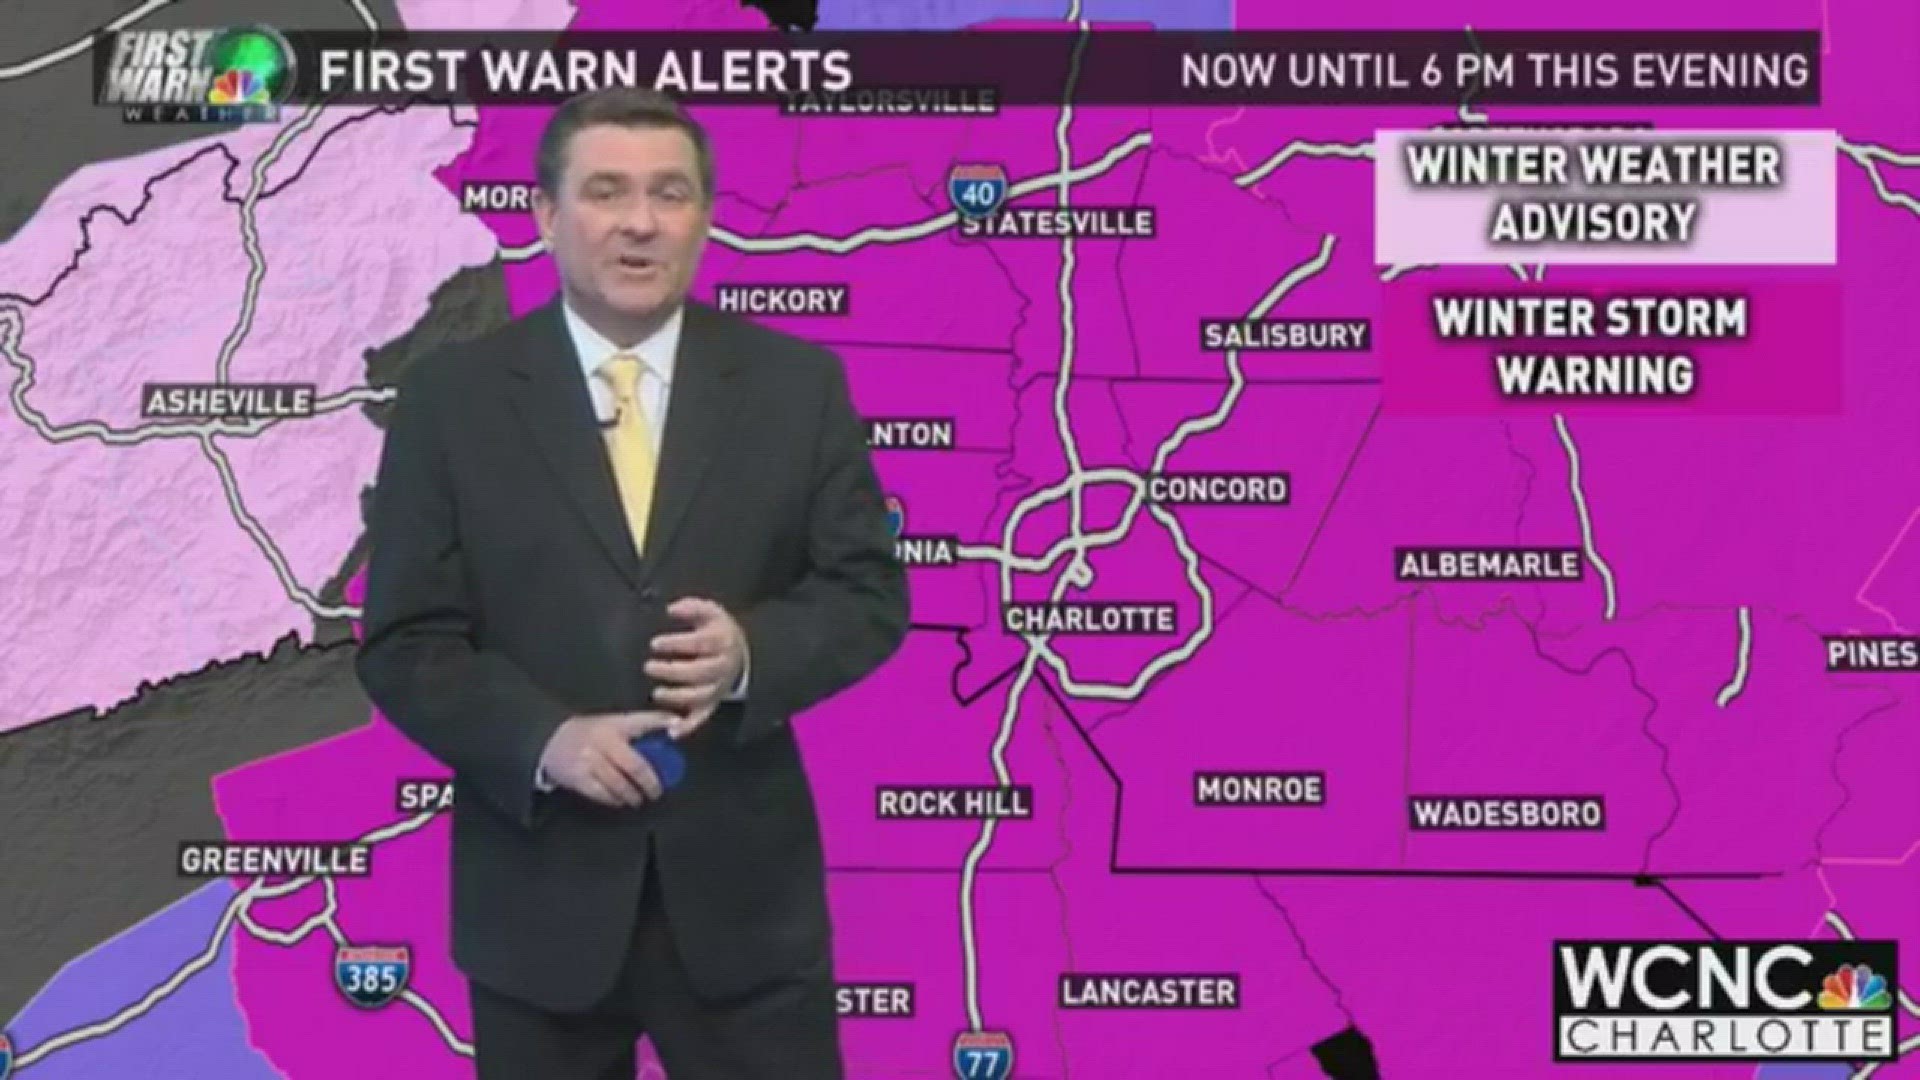 Meteorologist John Wendel is tracking the latest on the winter storm warning in effect until 6 p.m.